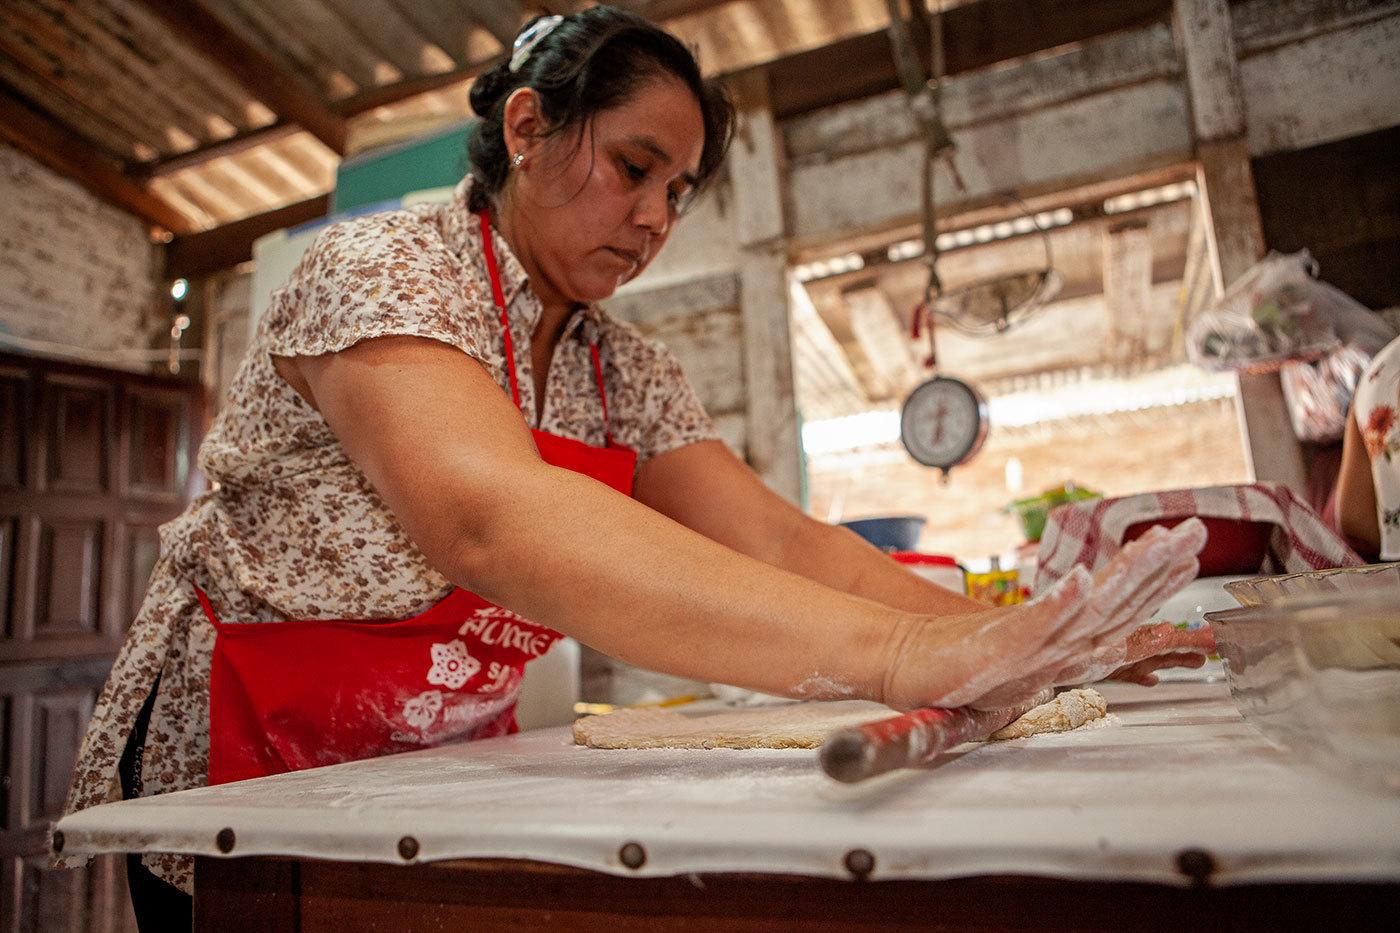 A Bolivian woman in a red apron rolls out dough